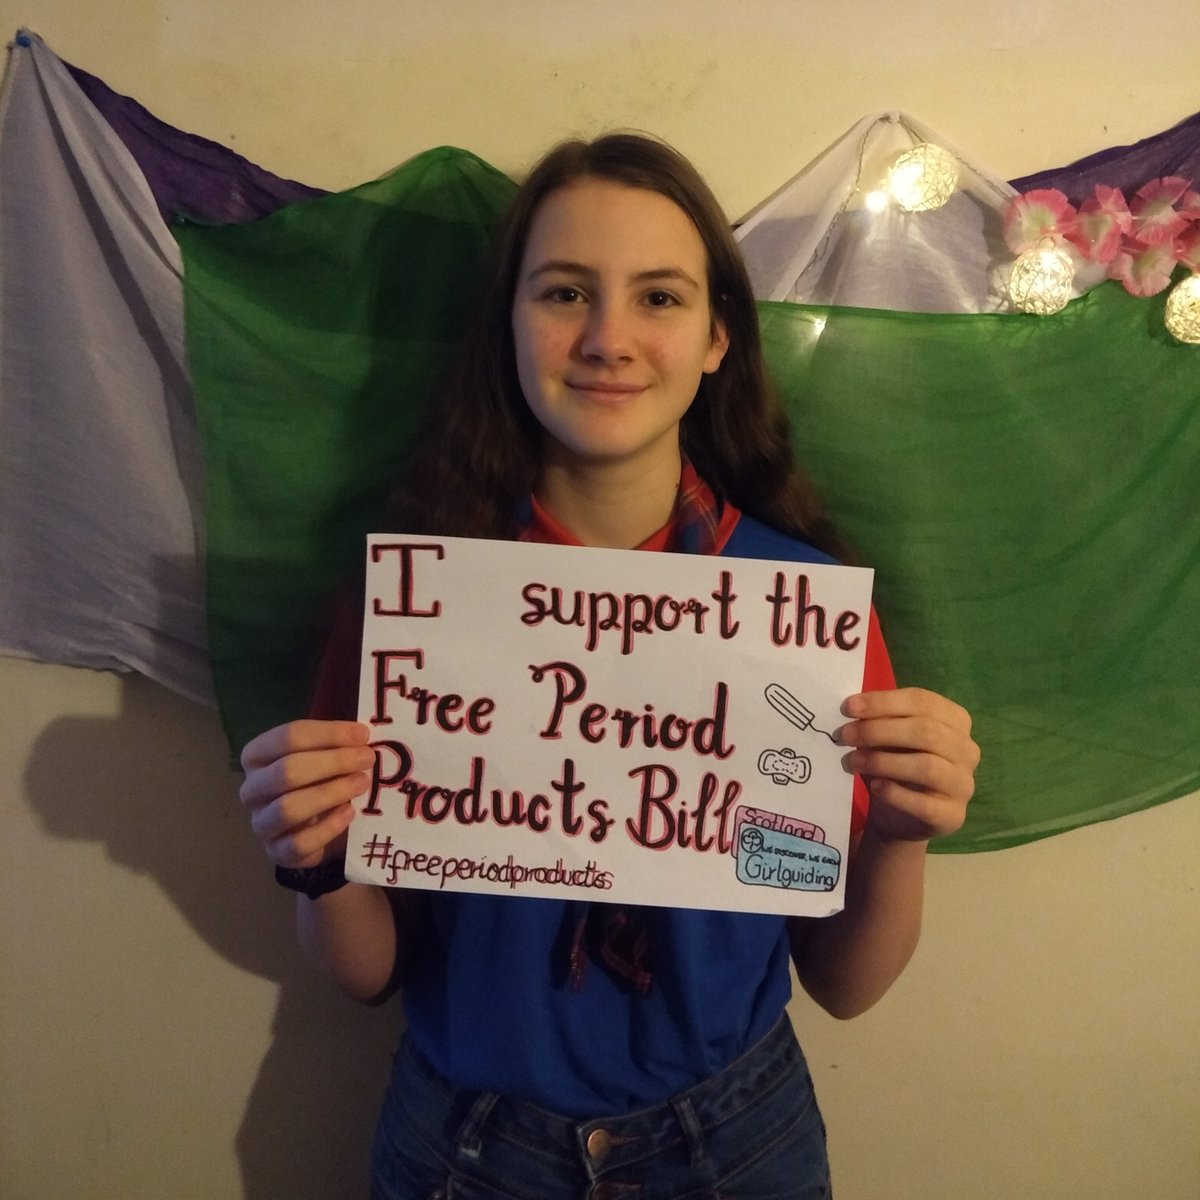 I’m proud to support the #FreePeriodProducts Bill. No-one should be forced to go without period products simply because they can’t afford them.